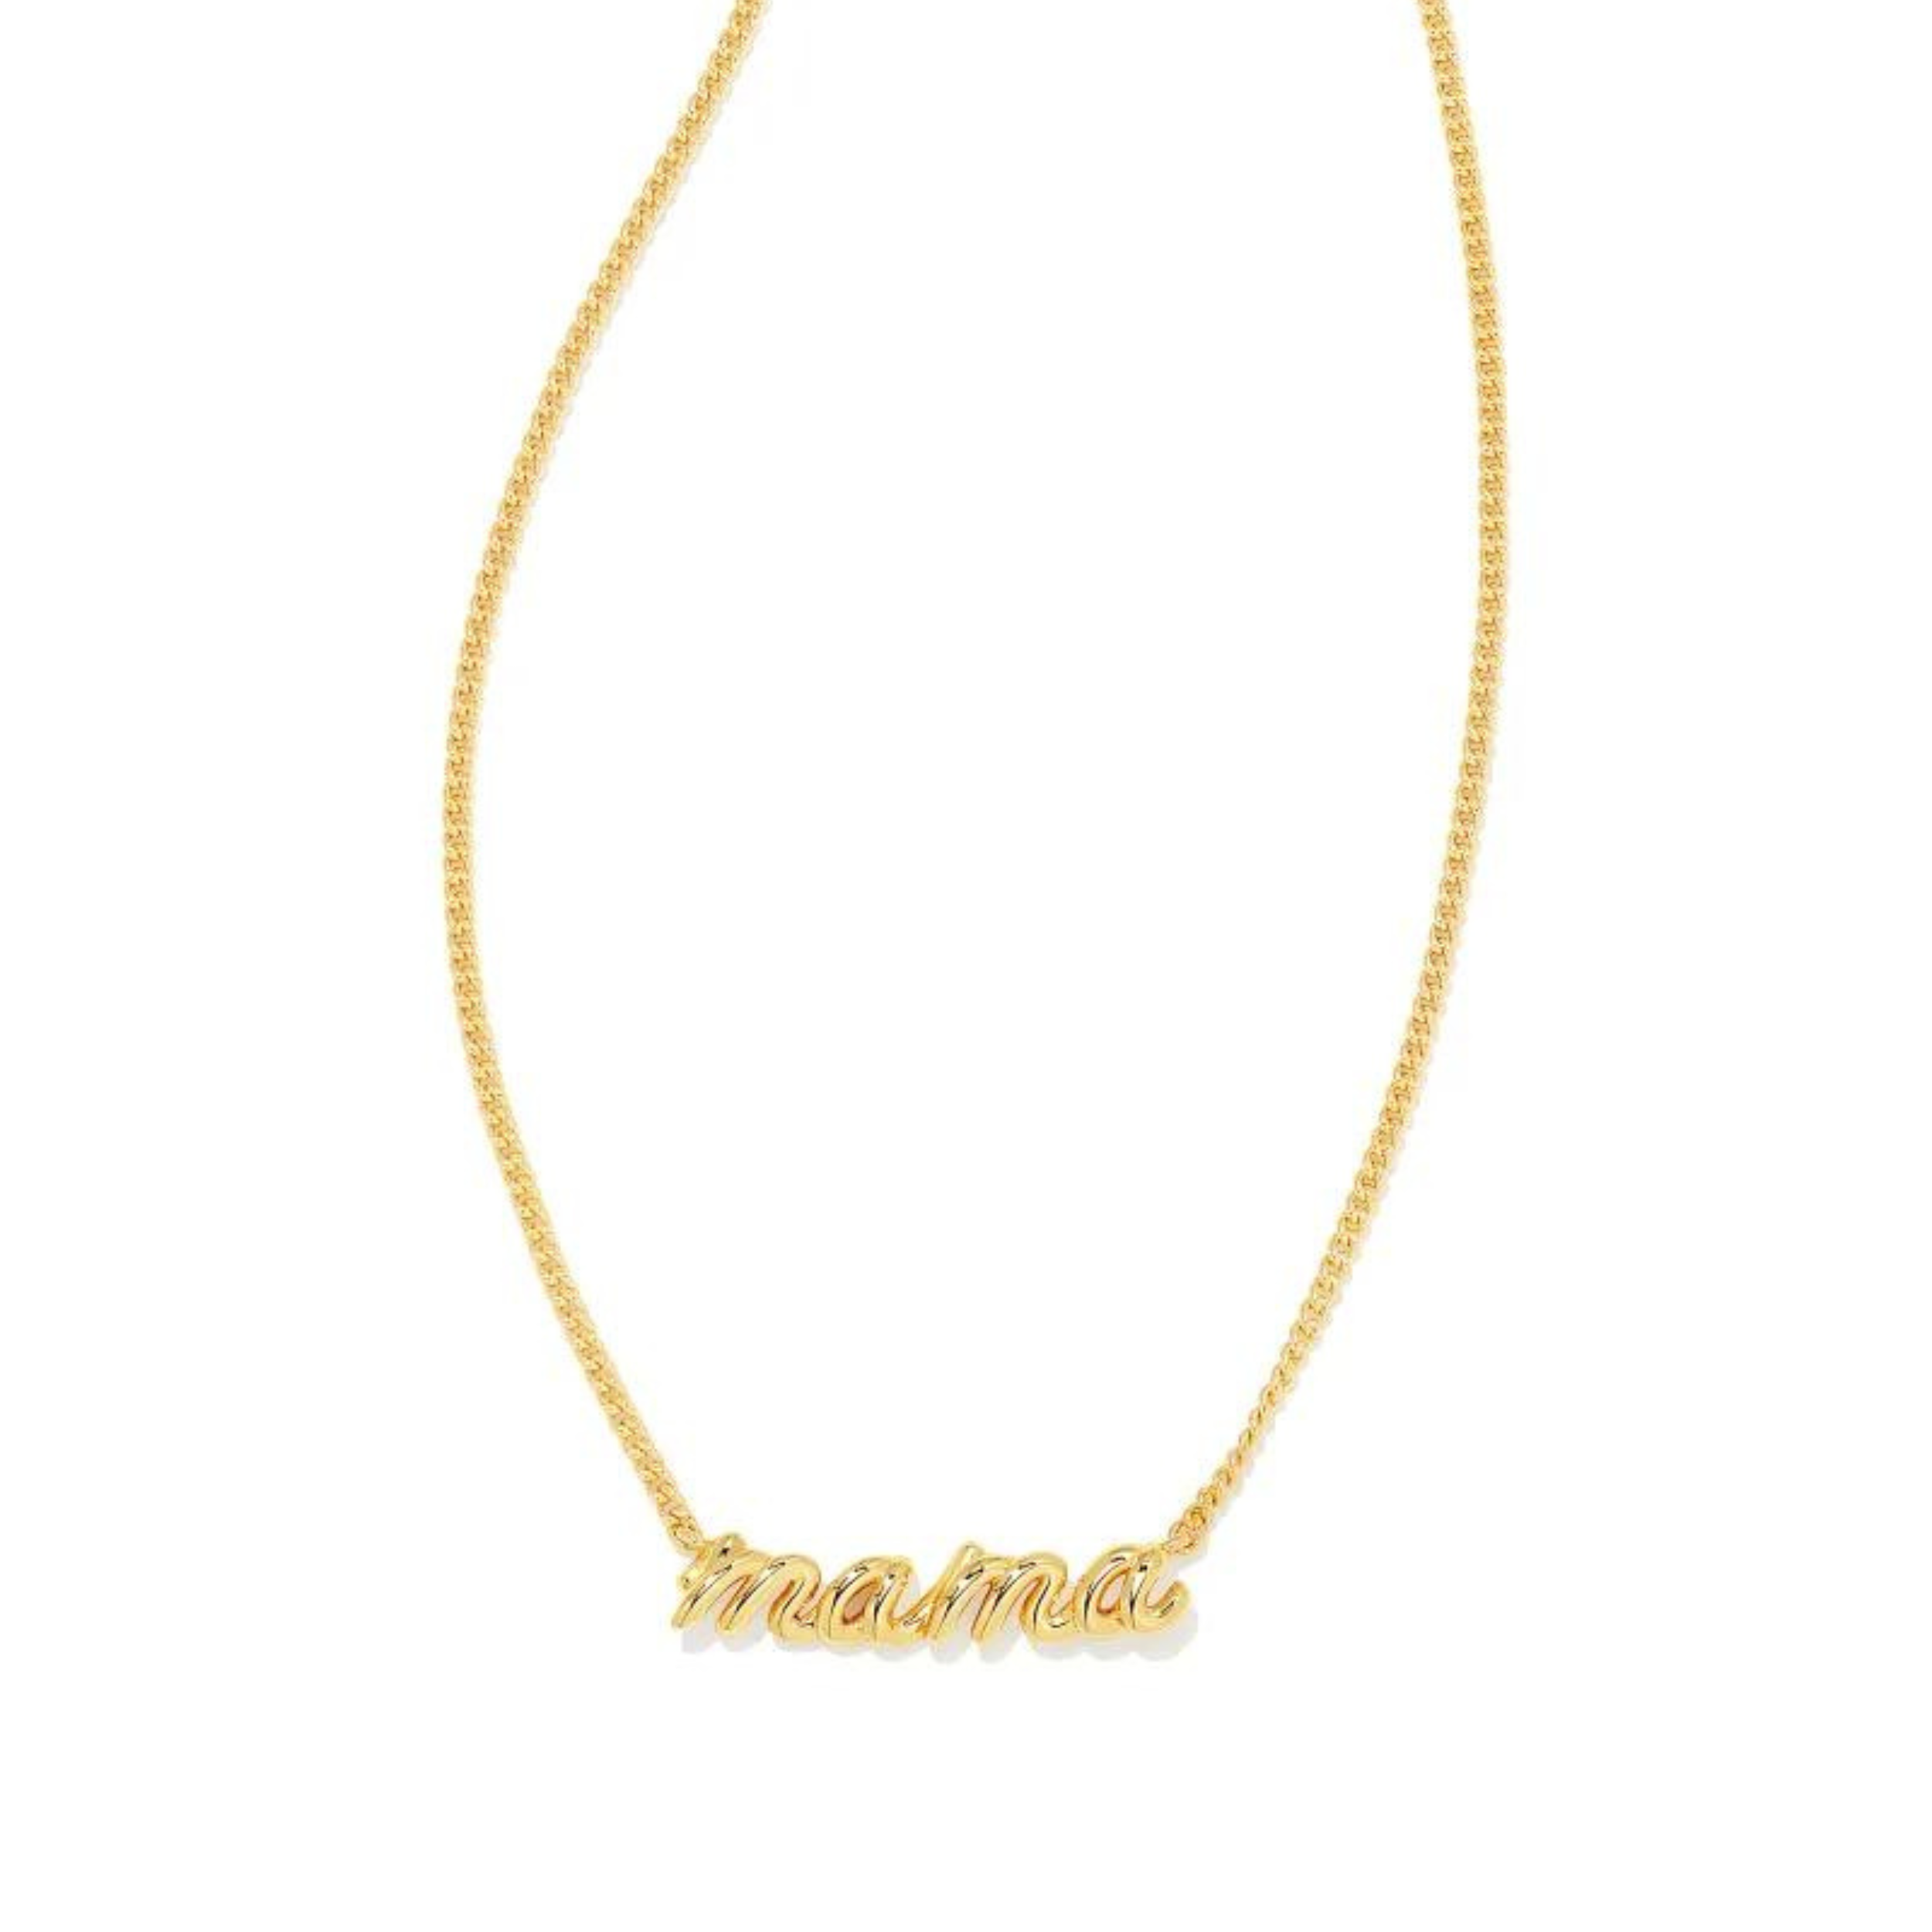 Gold necklace with the word mama in cursive, pictured on a white background.